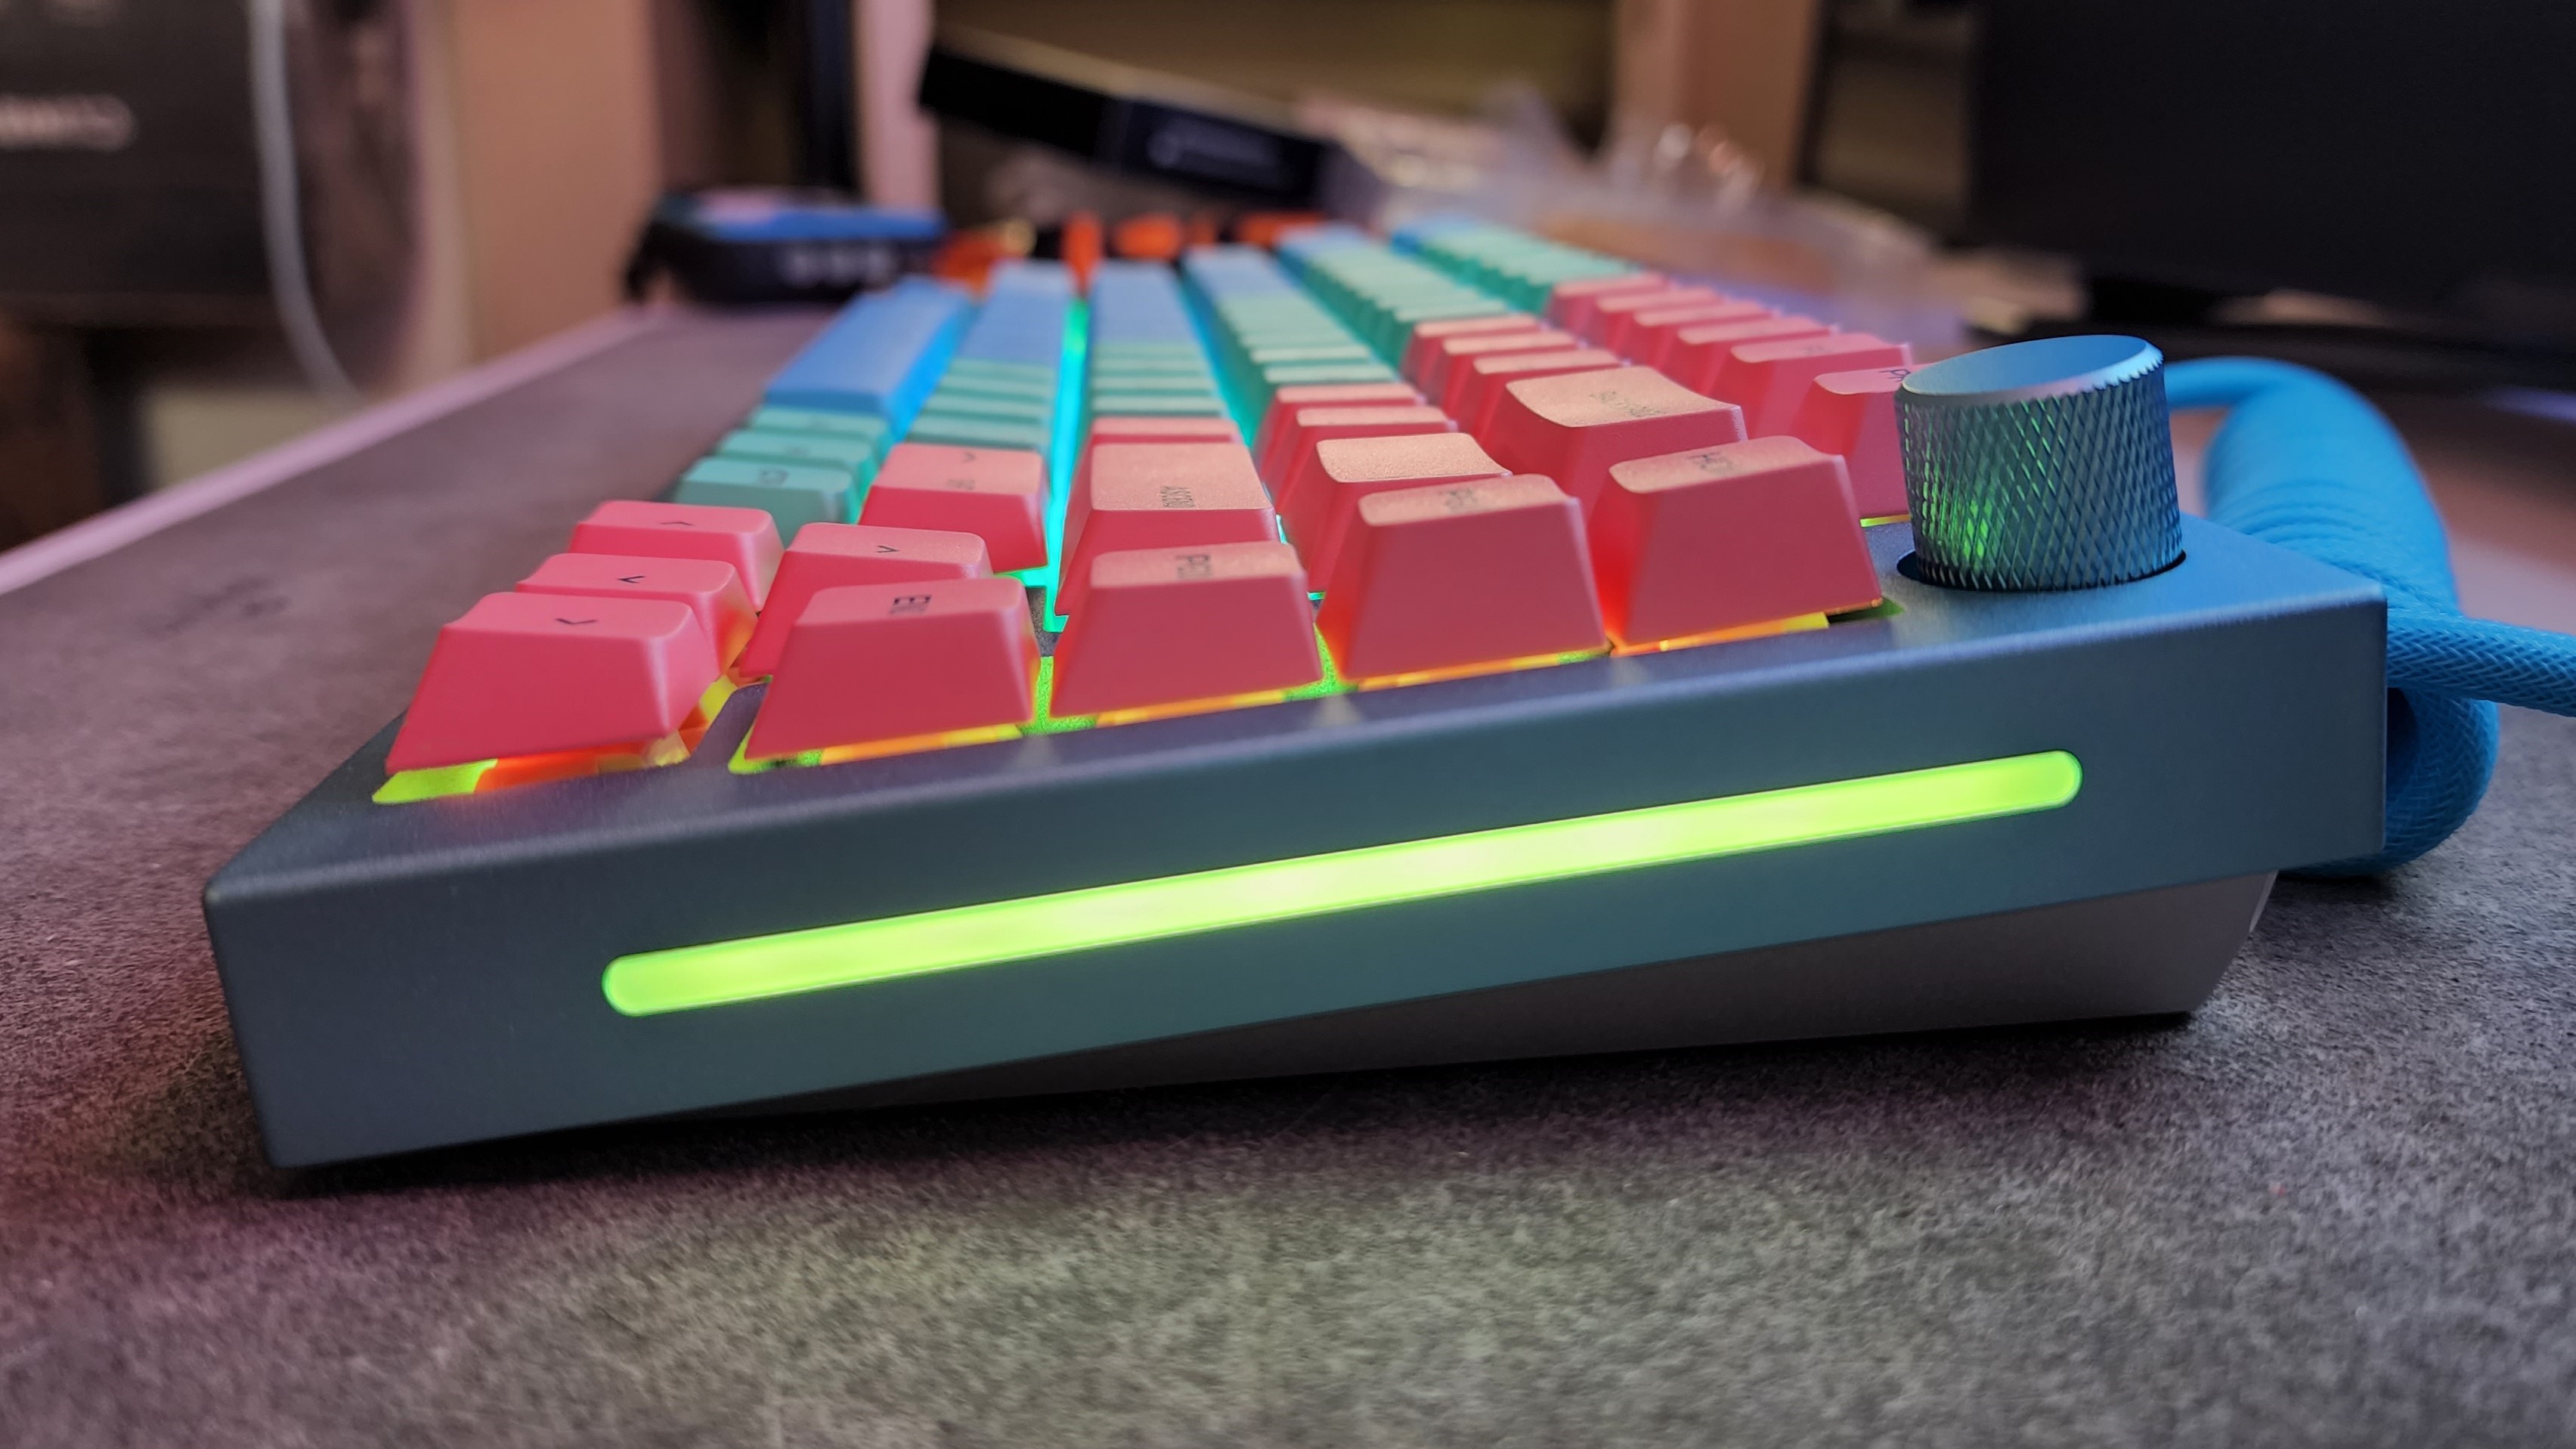 Glorious build your own keyboard